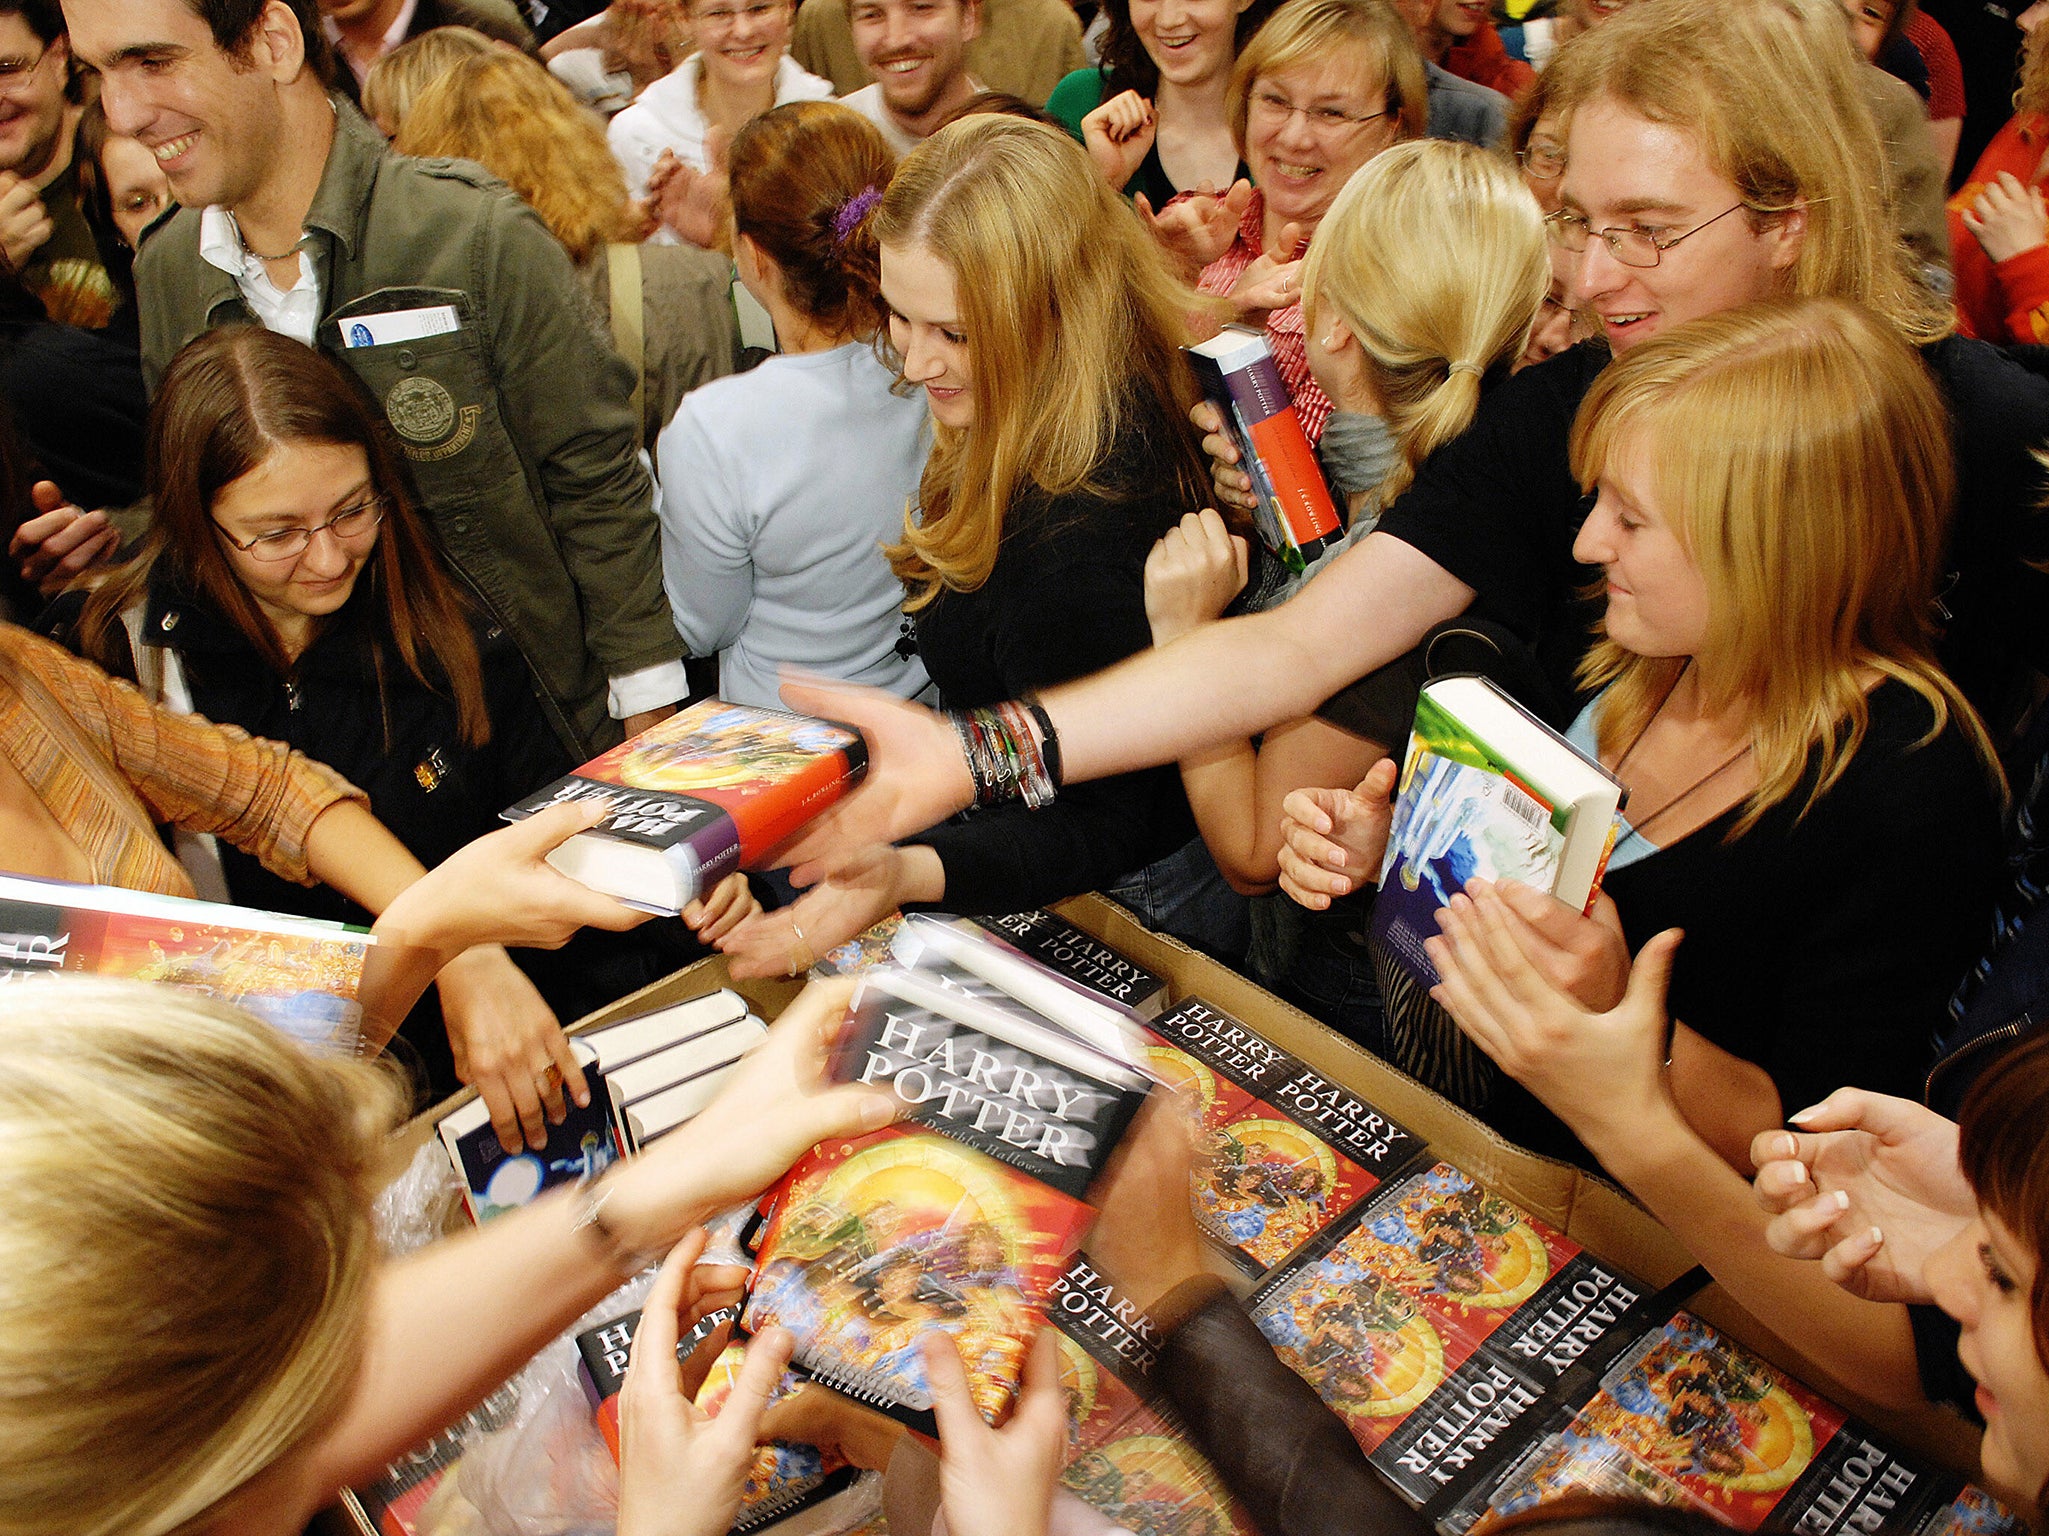 German fans scramble to get a copy of ‘Harry Potter and the Deathly Hallows’ in 2007